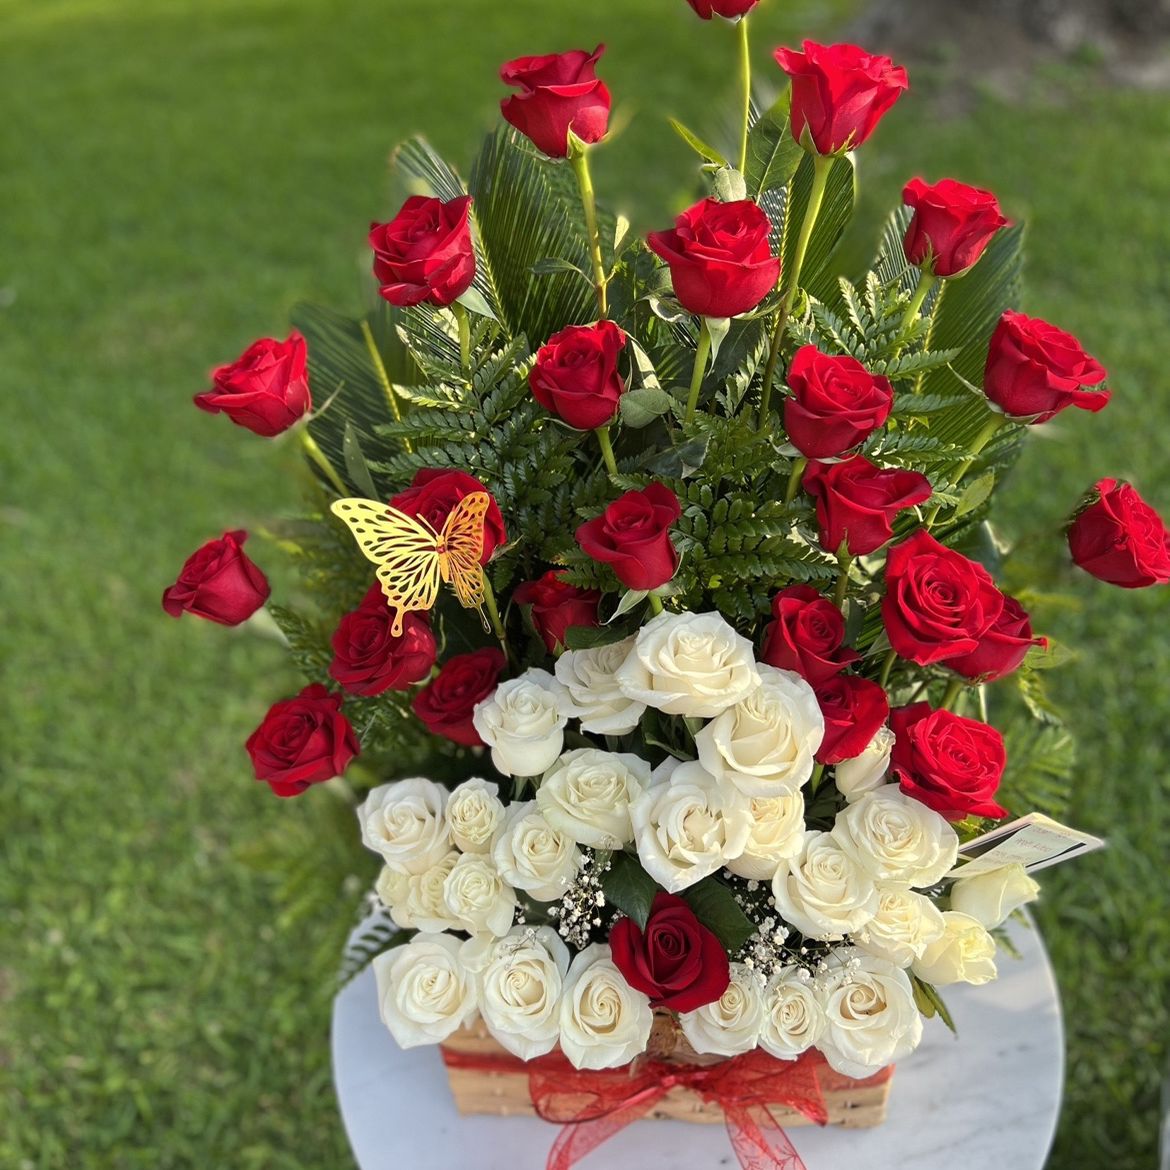 Bridal Bouquet Crown Of Thorns for Sale in Sienna Plant, TX - OfferUp